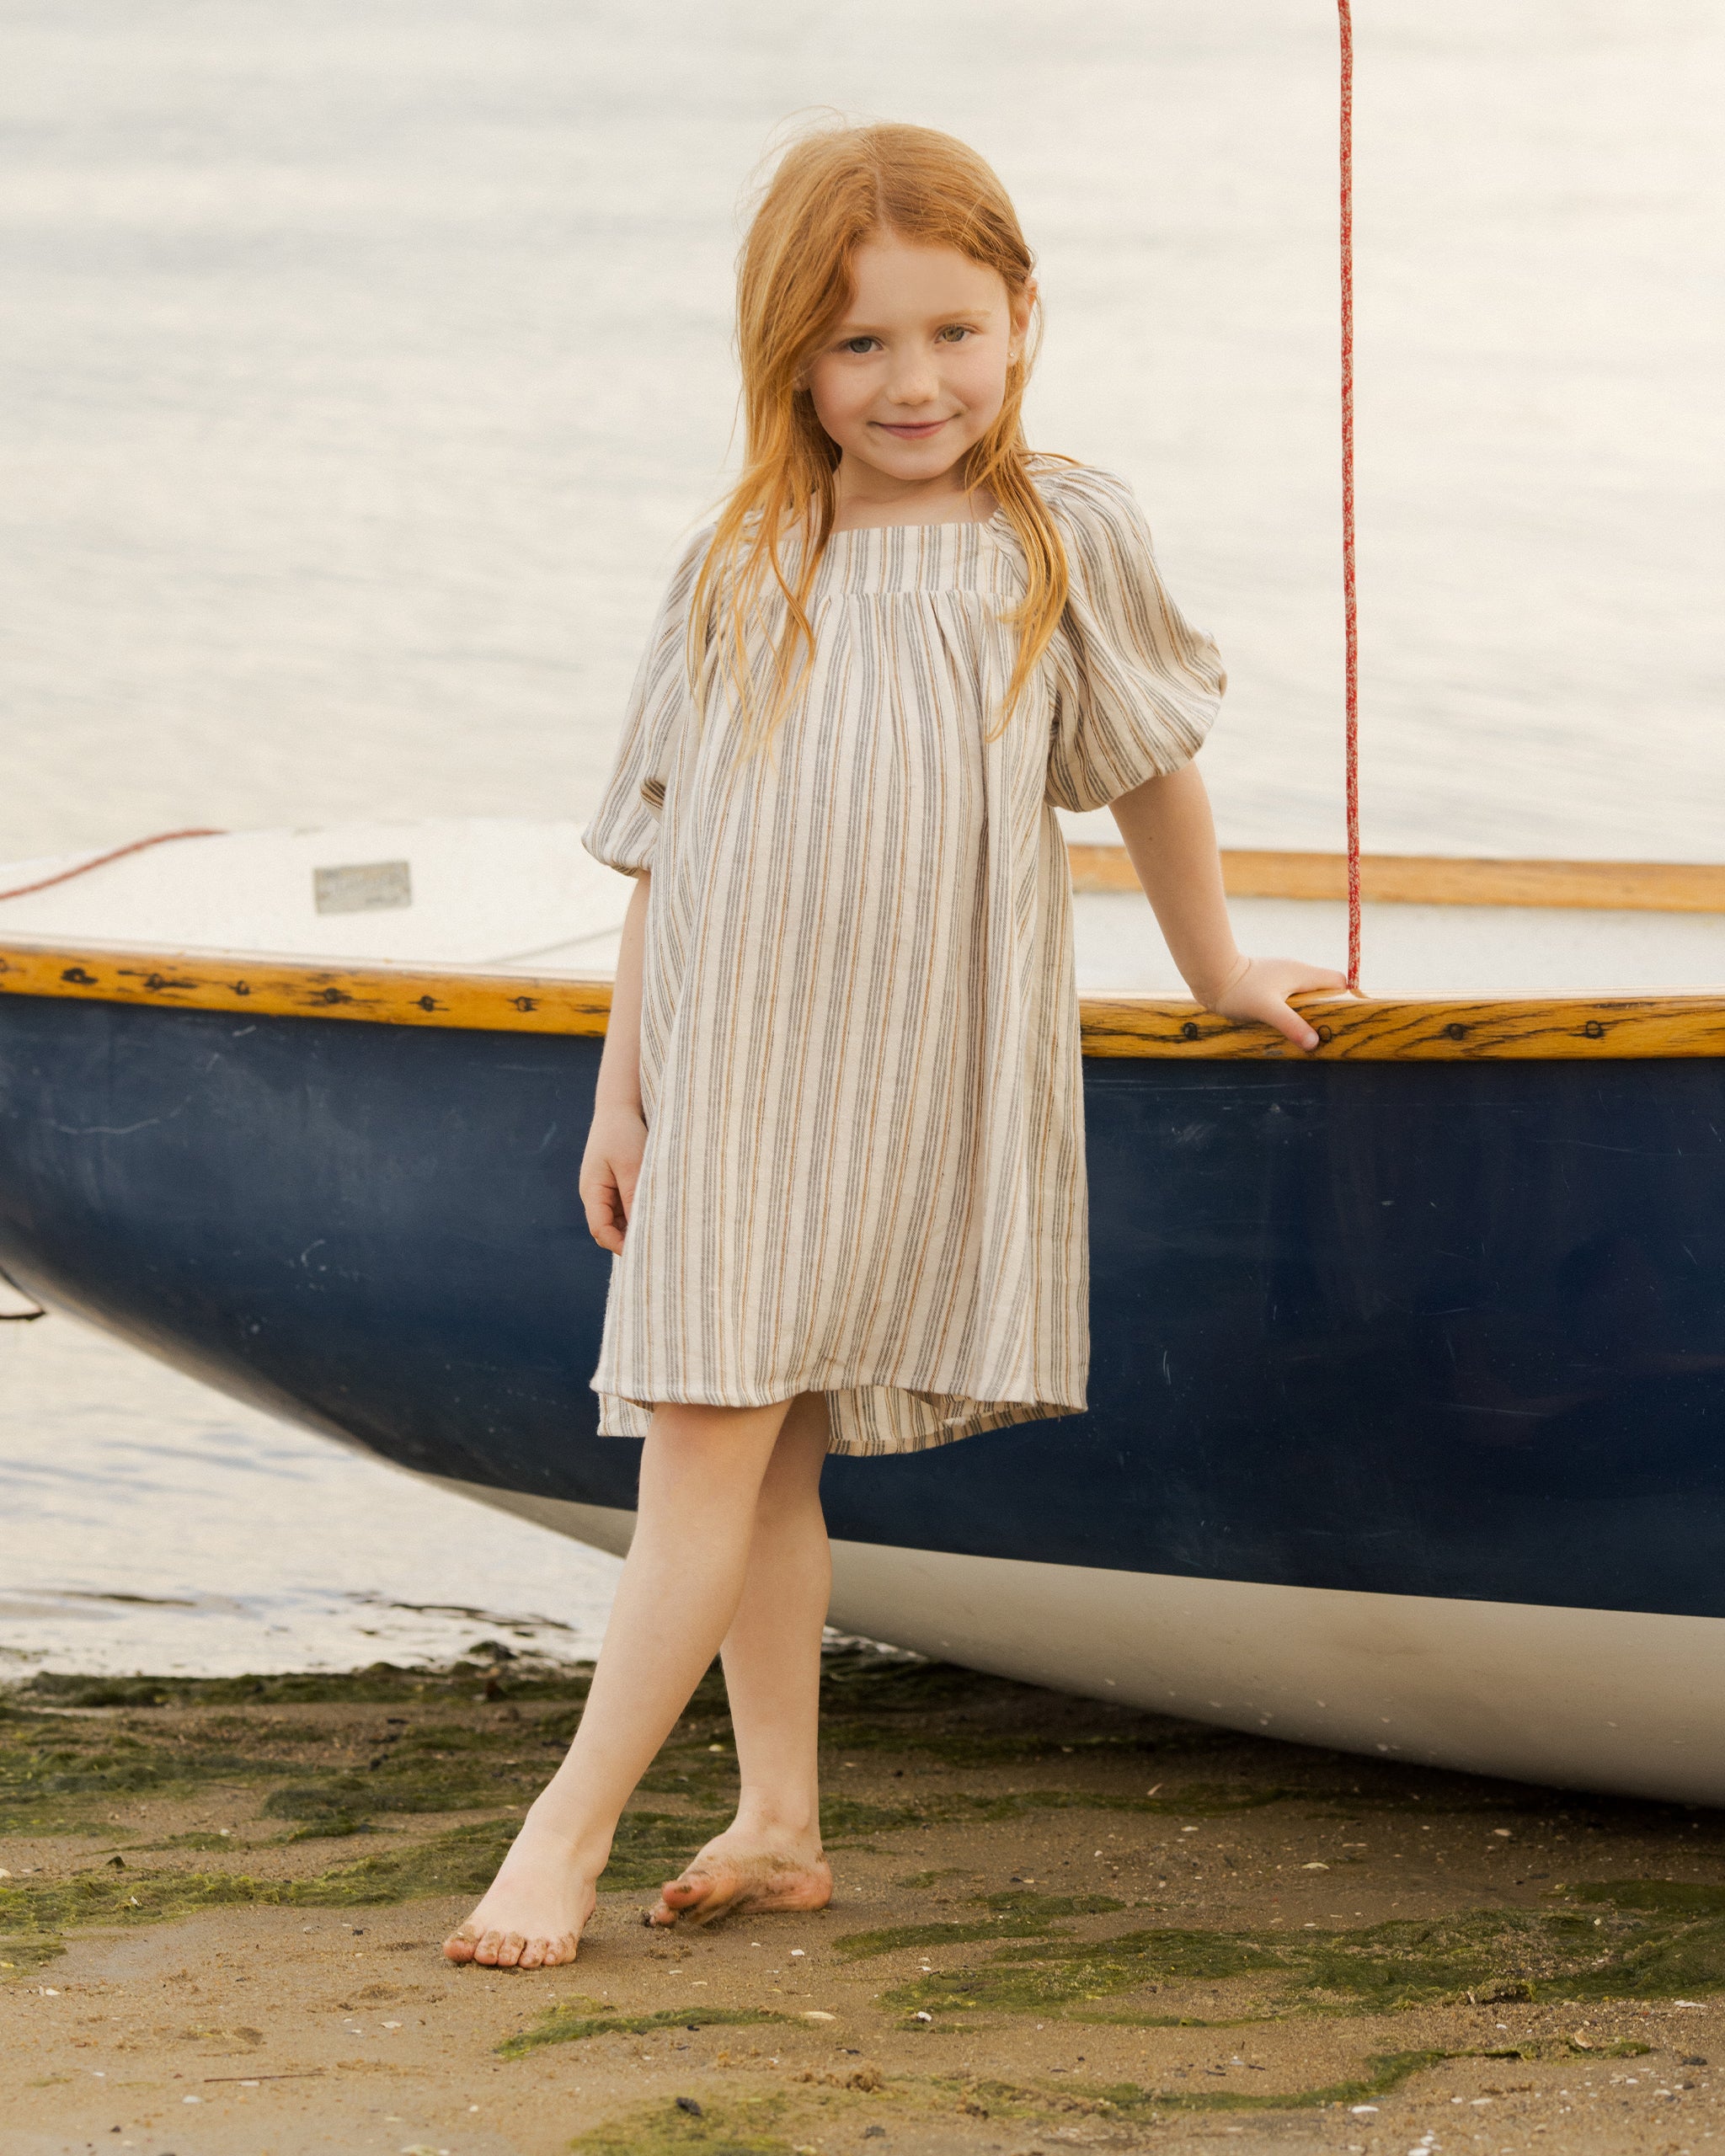 Talee Dress || Nautical Stripe - Rylee + Cru | Kids Clothes | Trendy Baby Clothes | Modern Infant Outfits |